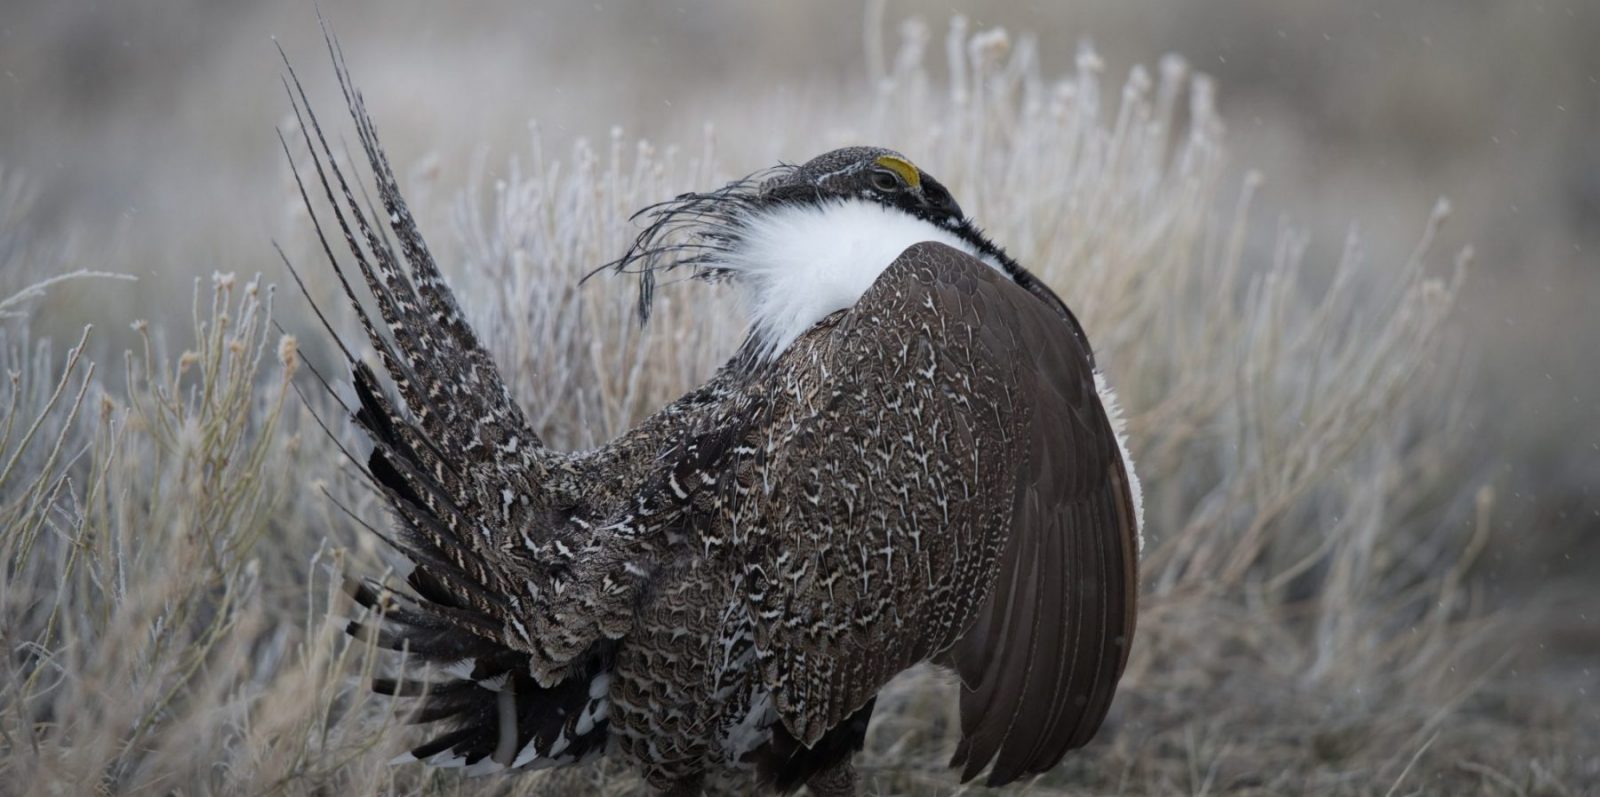 Your comments can help uphold historic sage-grouse protections